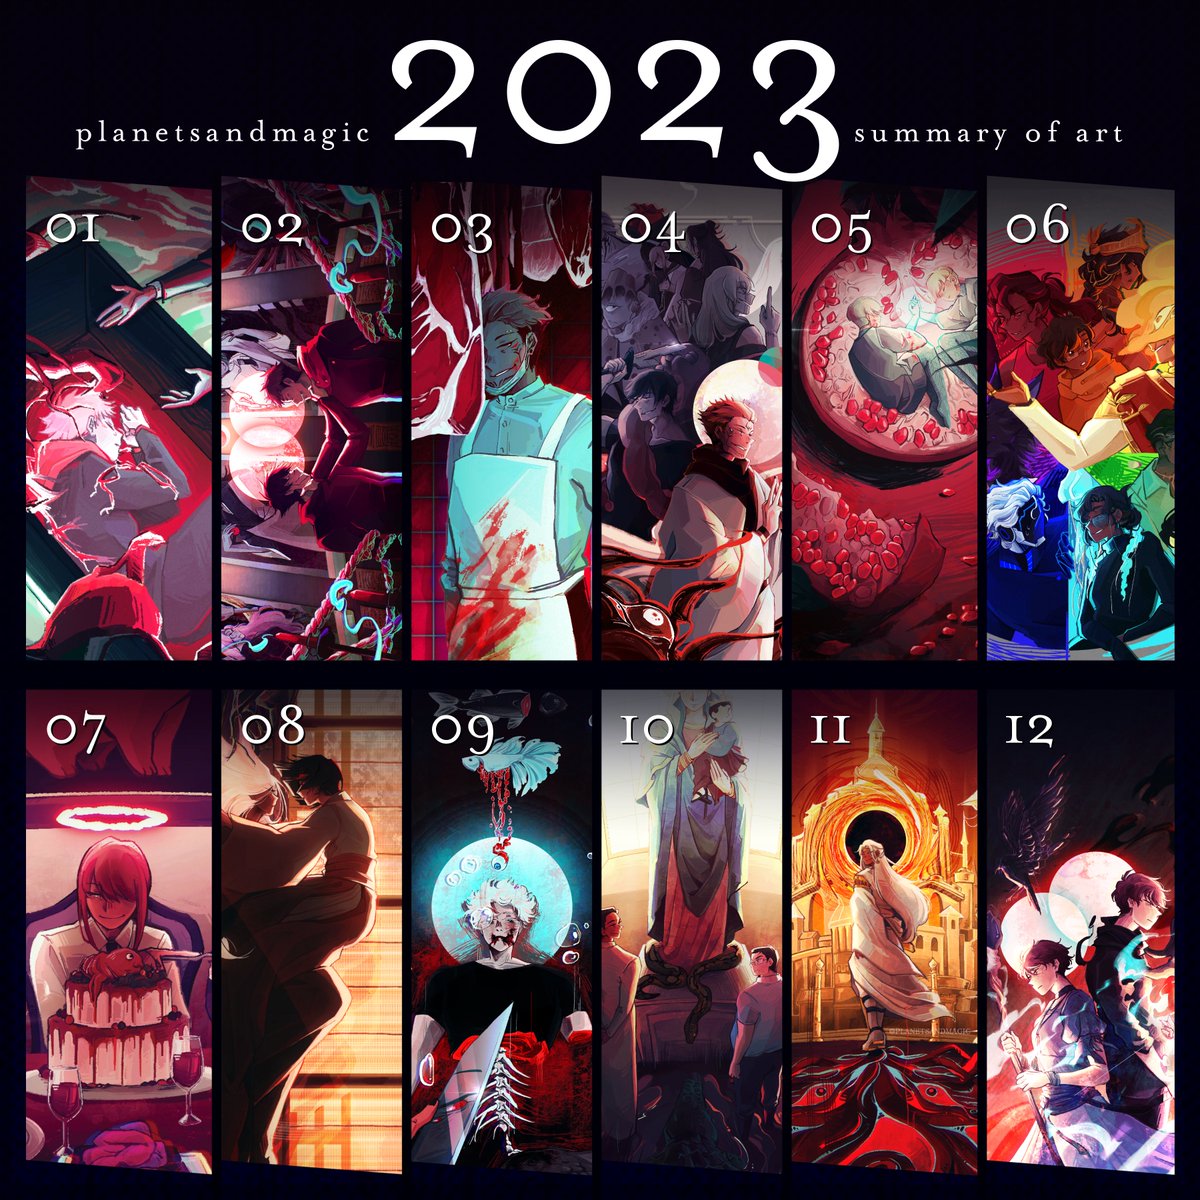 last post for the year, here's my 2023 art summary ✨